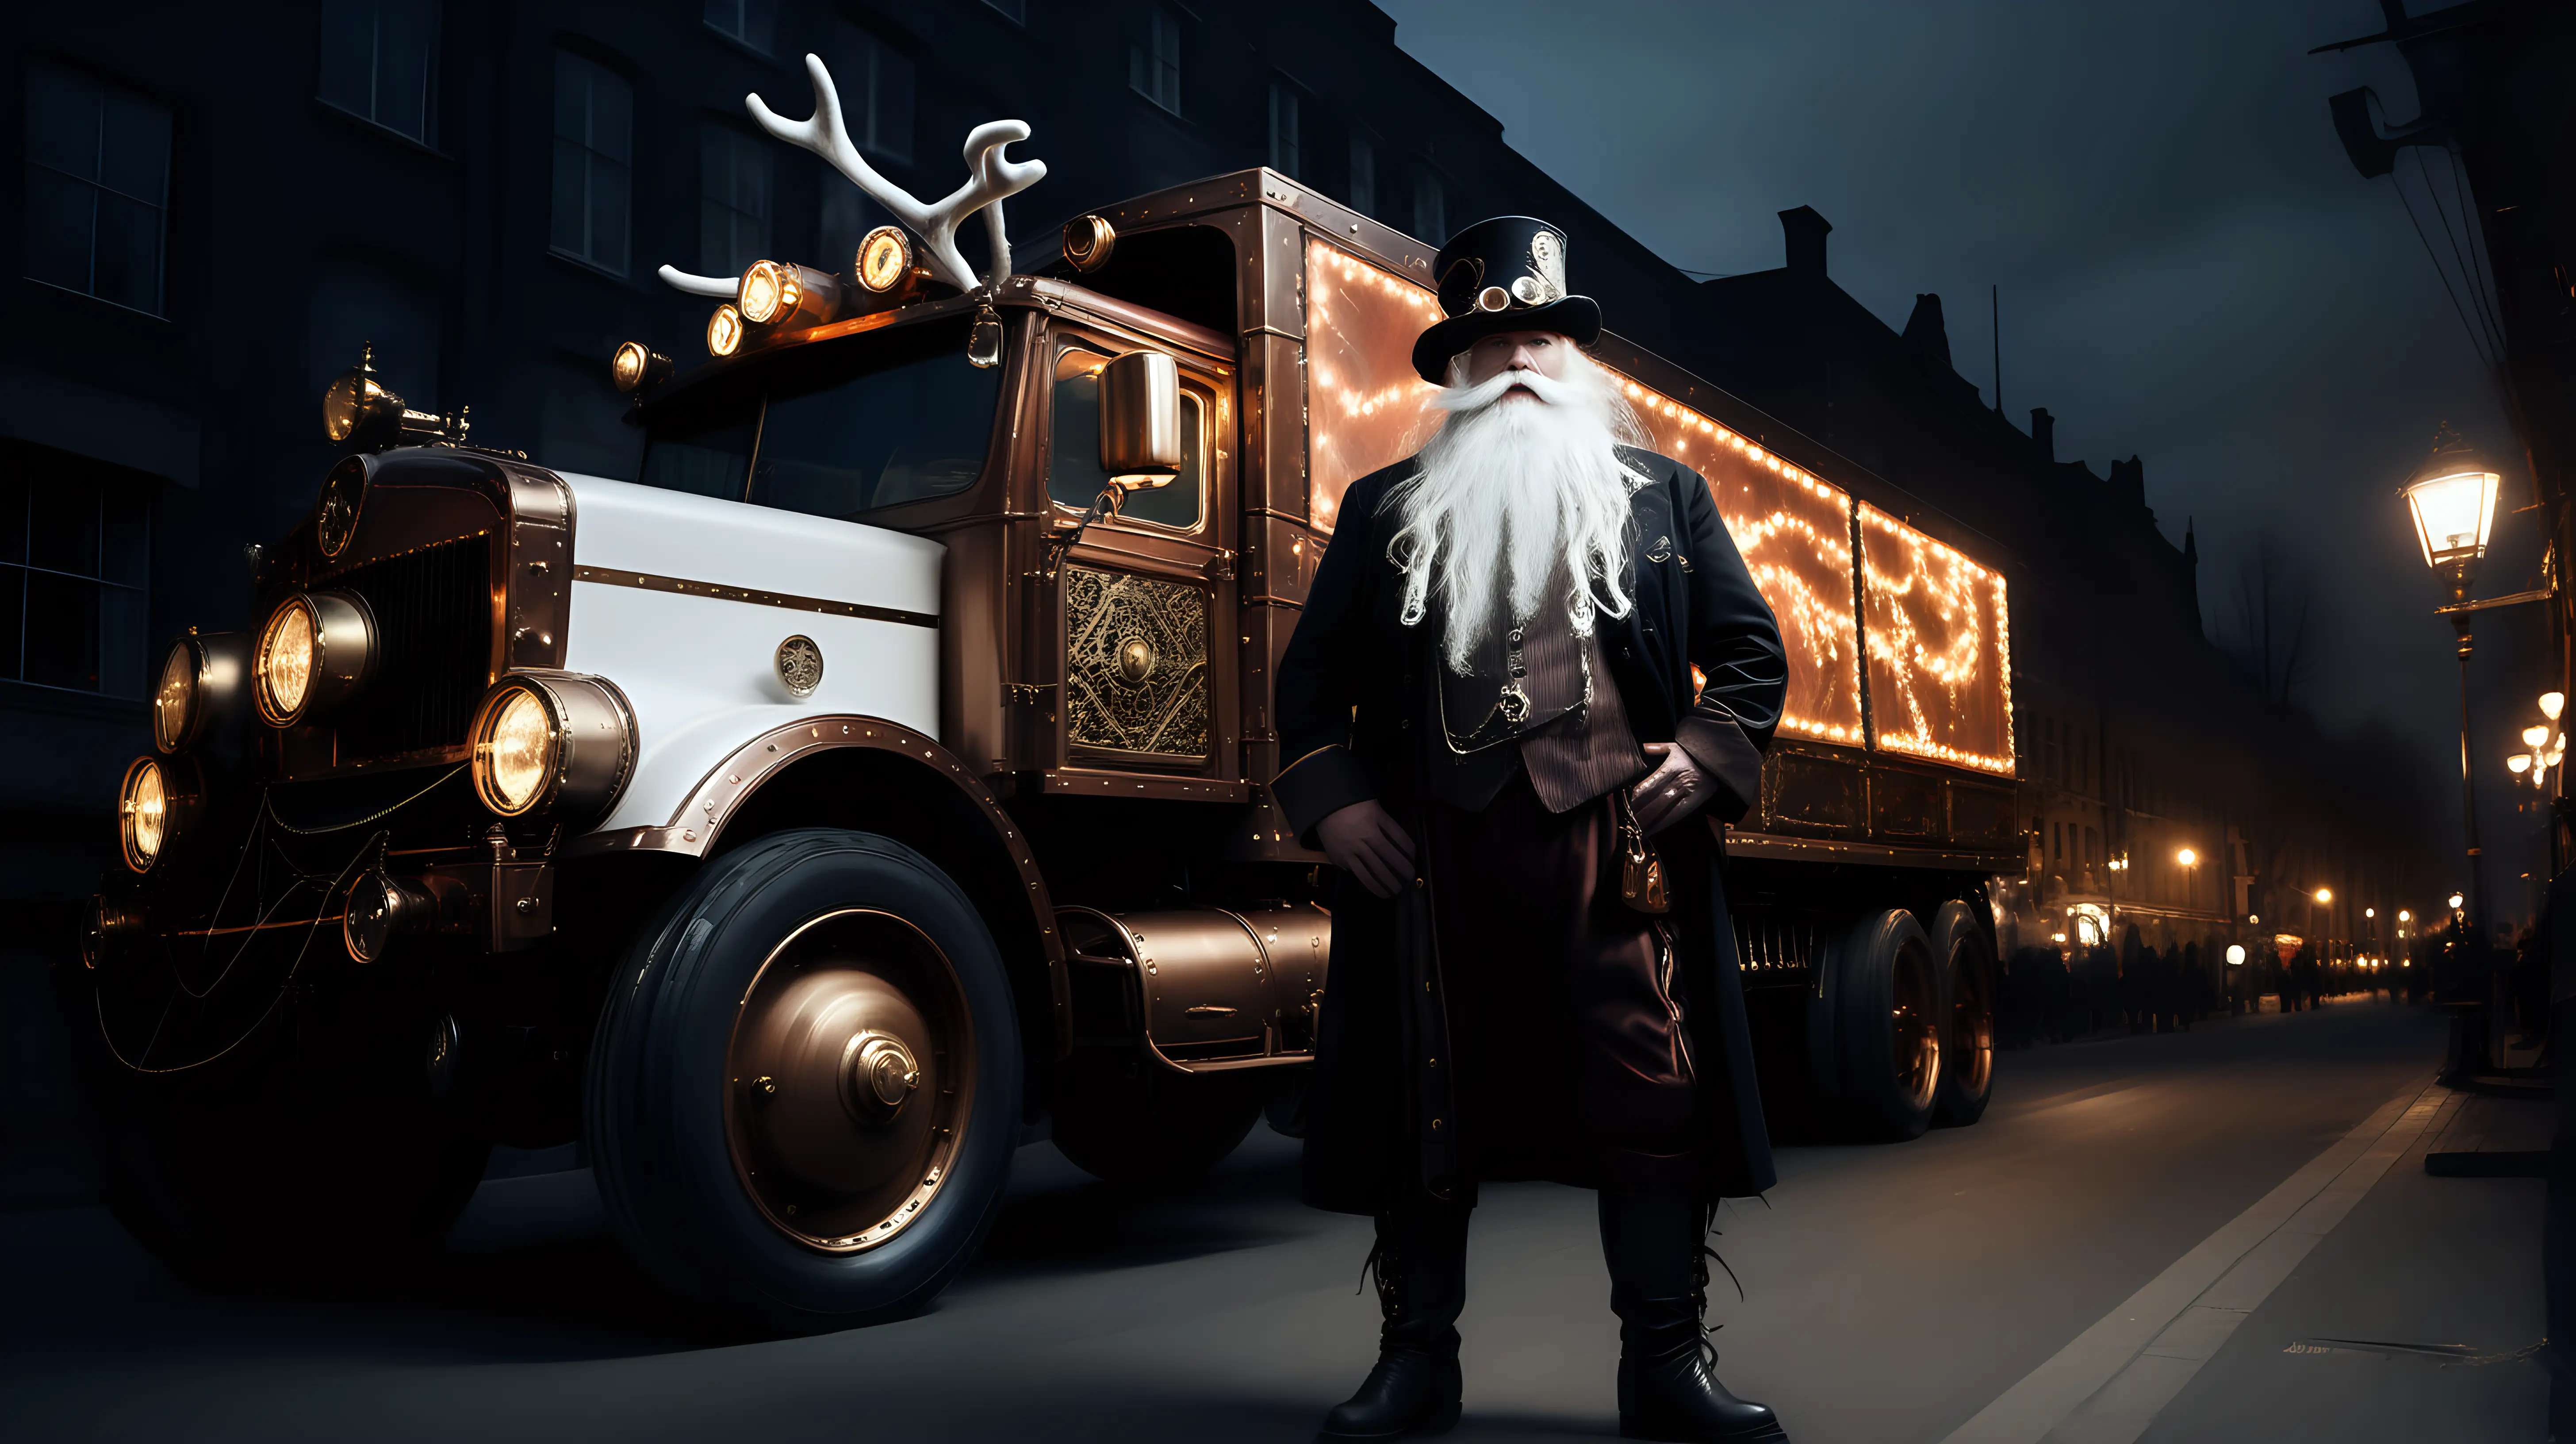 Steampunk Man with Long White Beard and Reindeers on a Dark Street